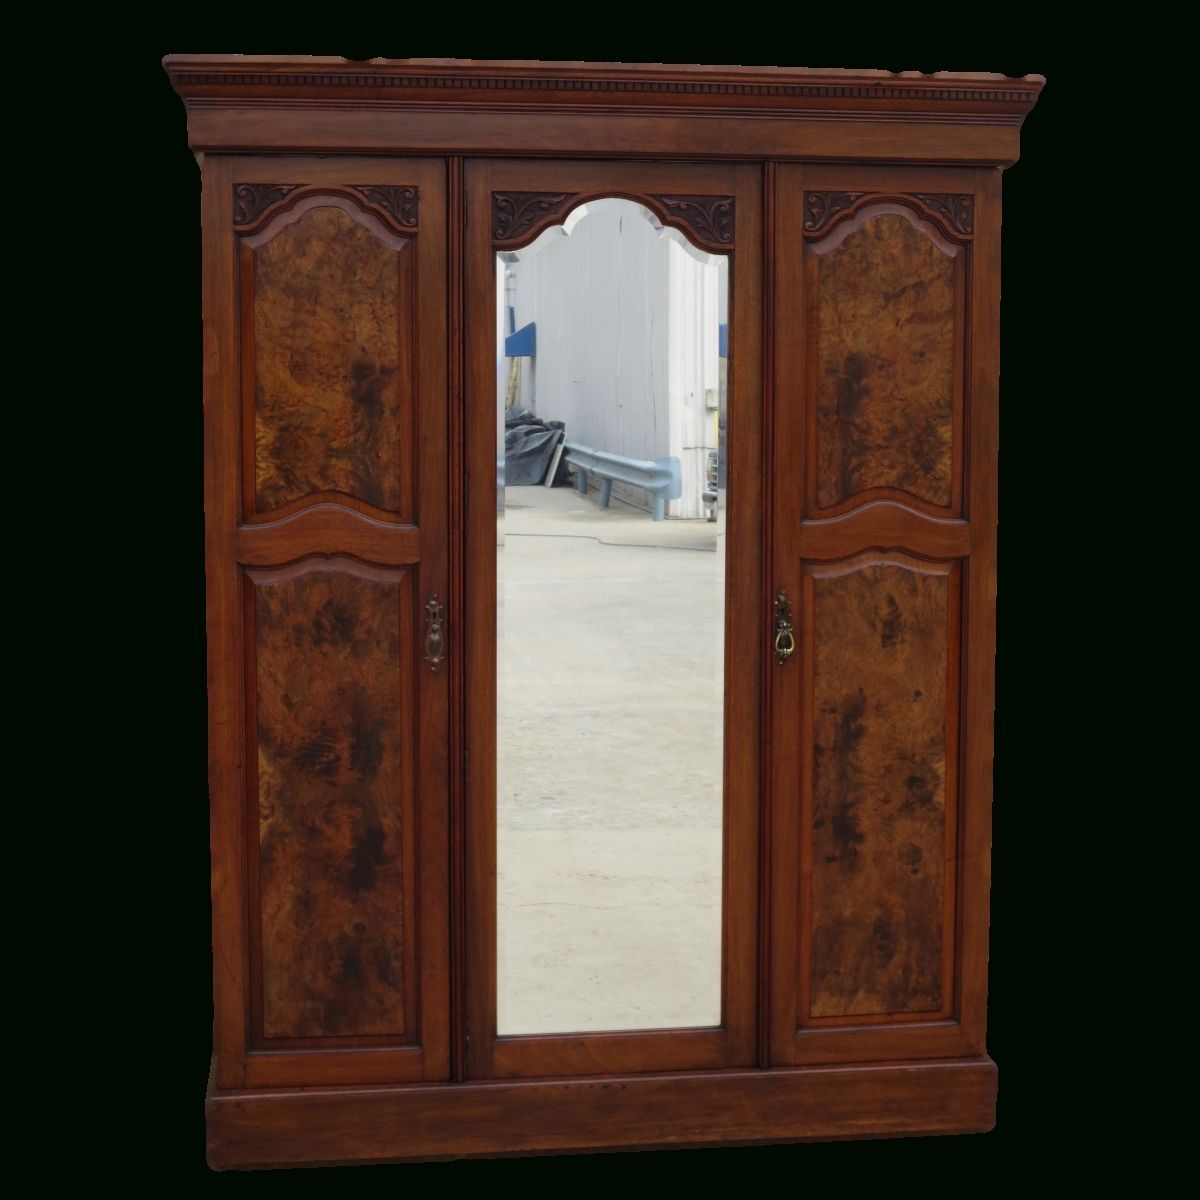 Antique Armoires, Antique Wardrobes, And Antique Furniture From In Antique Wardrobes (View 15 of 15)